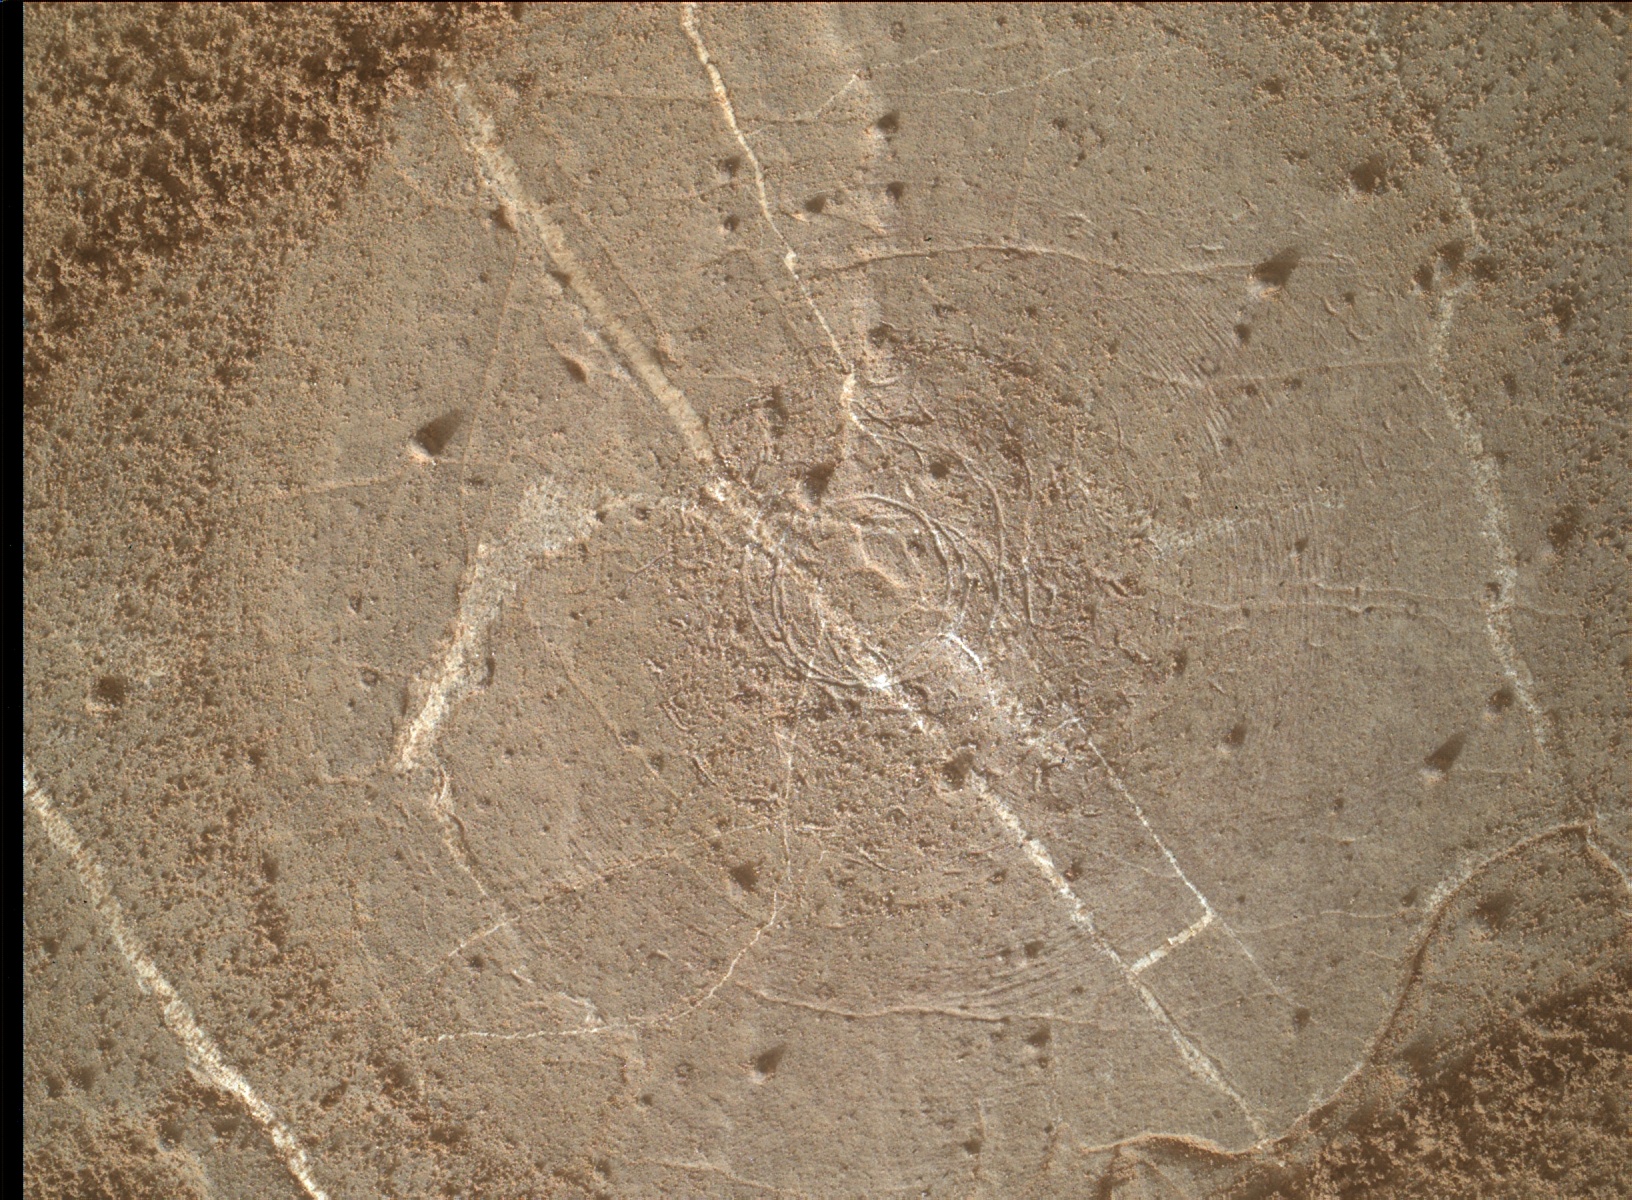 Nasa's Mars rover Curiosity acquired this image using its Mars Hand Lens Imager (MAHLI) on Sol 3051